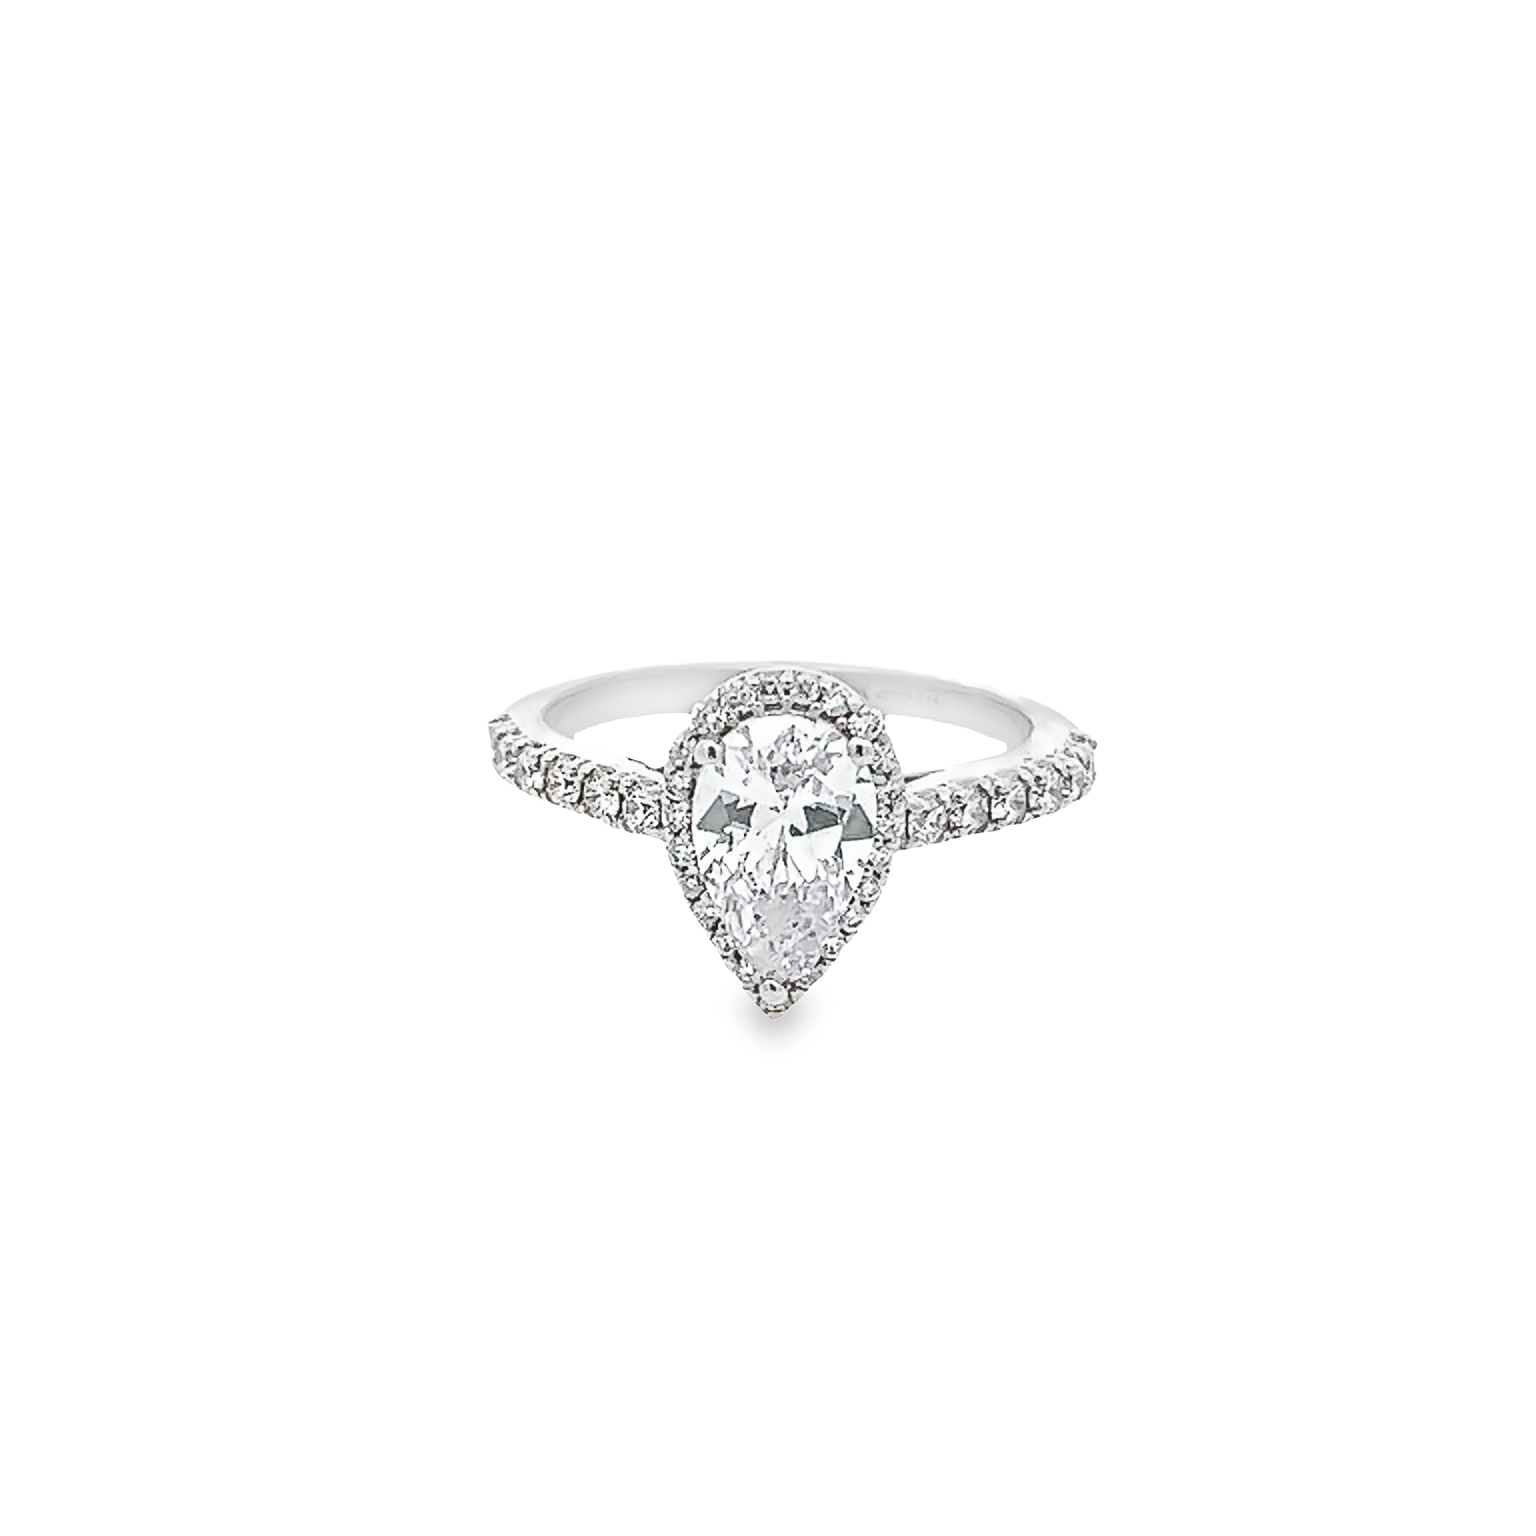 14 Karat white gold semi mount engagement ring with 35=0.42 total weight Round Brilliant G VS Diamonds. Size 7